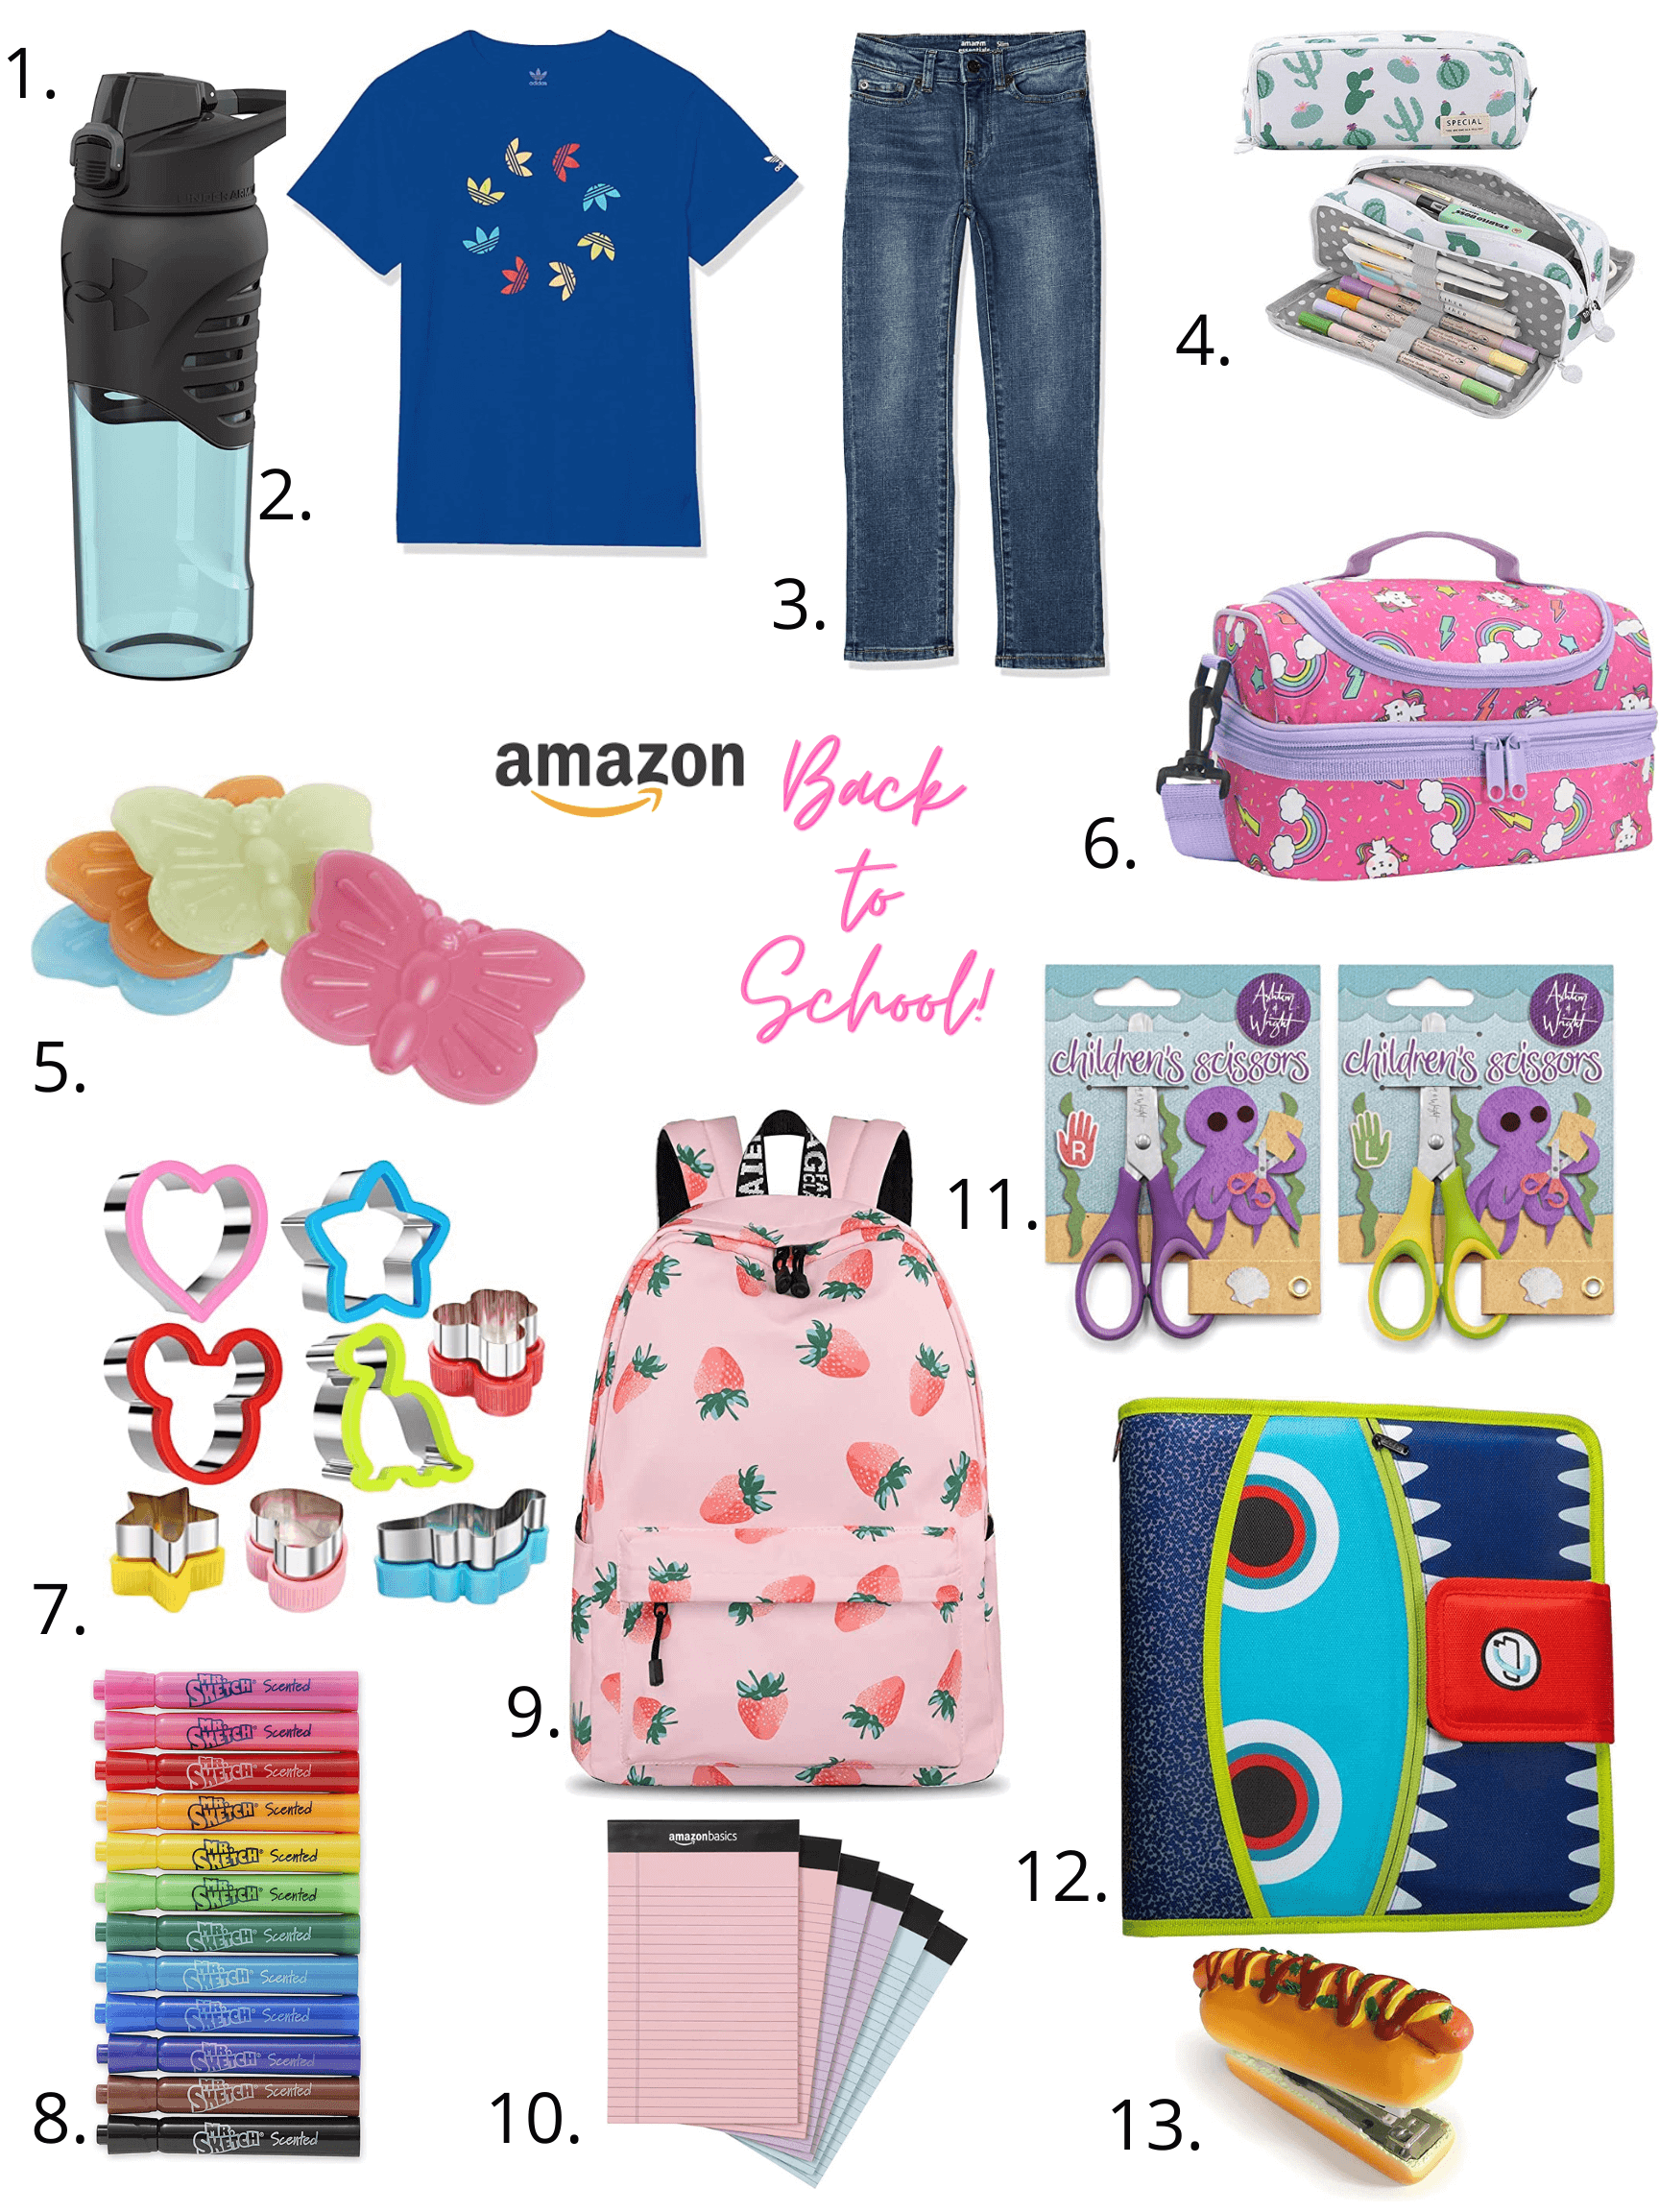 Amazon Back-to-school essentials for kids